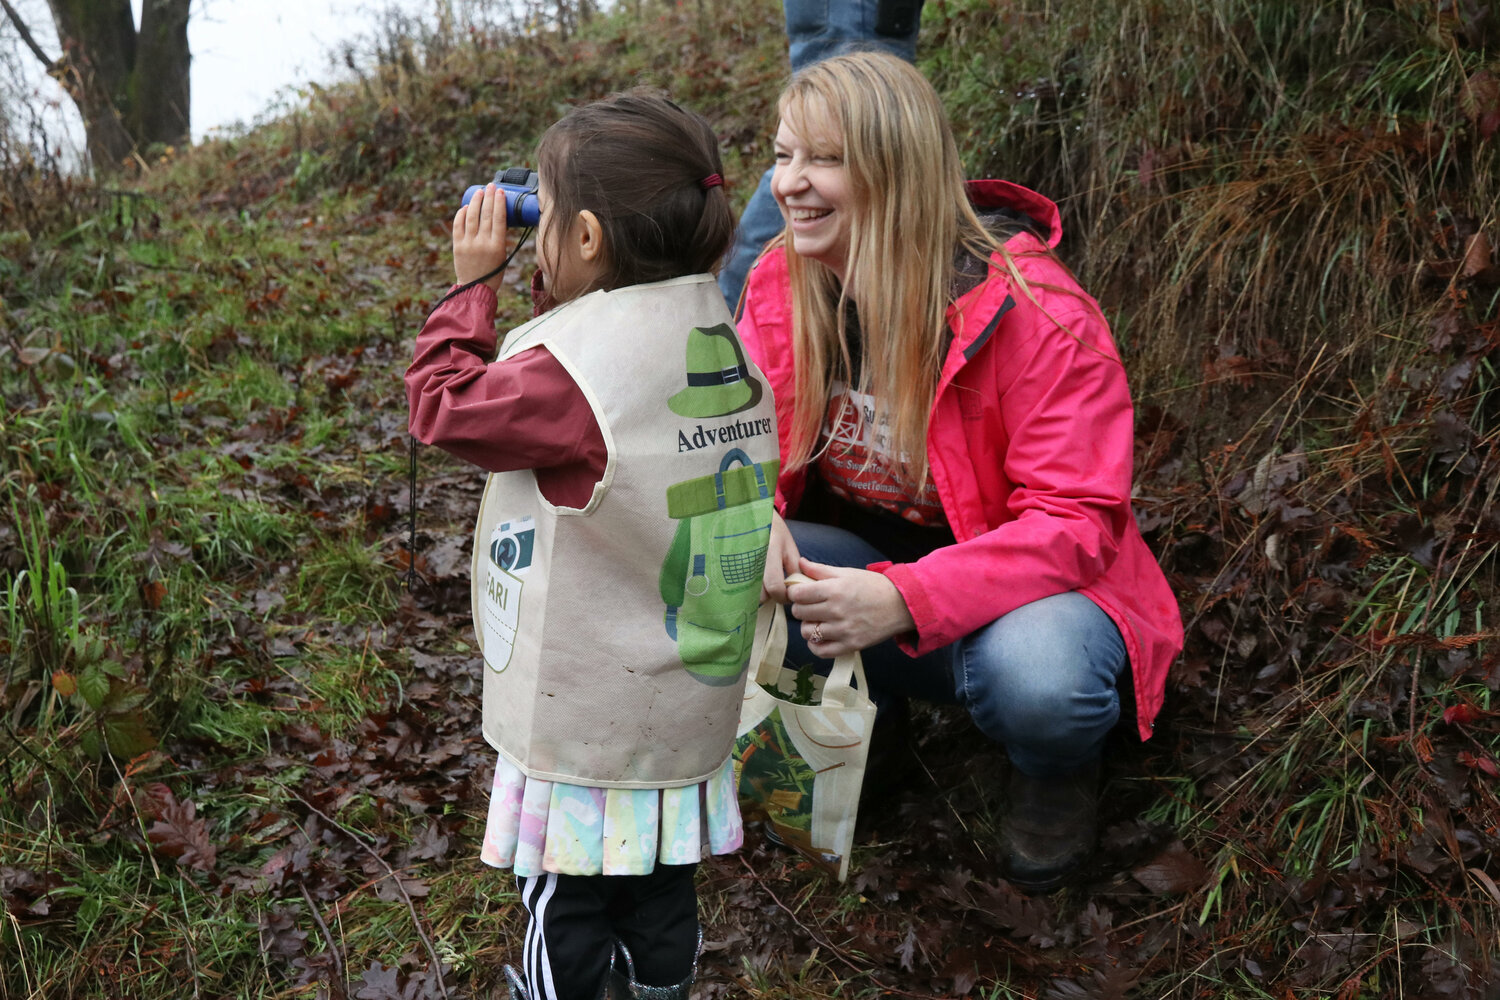 Sweet Tomatoes Learning Center Executive Director Kathleen Reed smiles while Maya, 4, looks for birds along the learning center’s nature trail in Chehalis on Wednesday, Dec. 6.